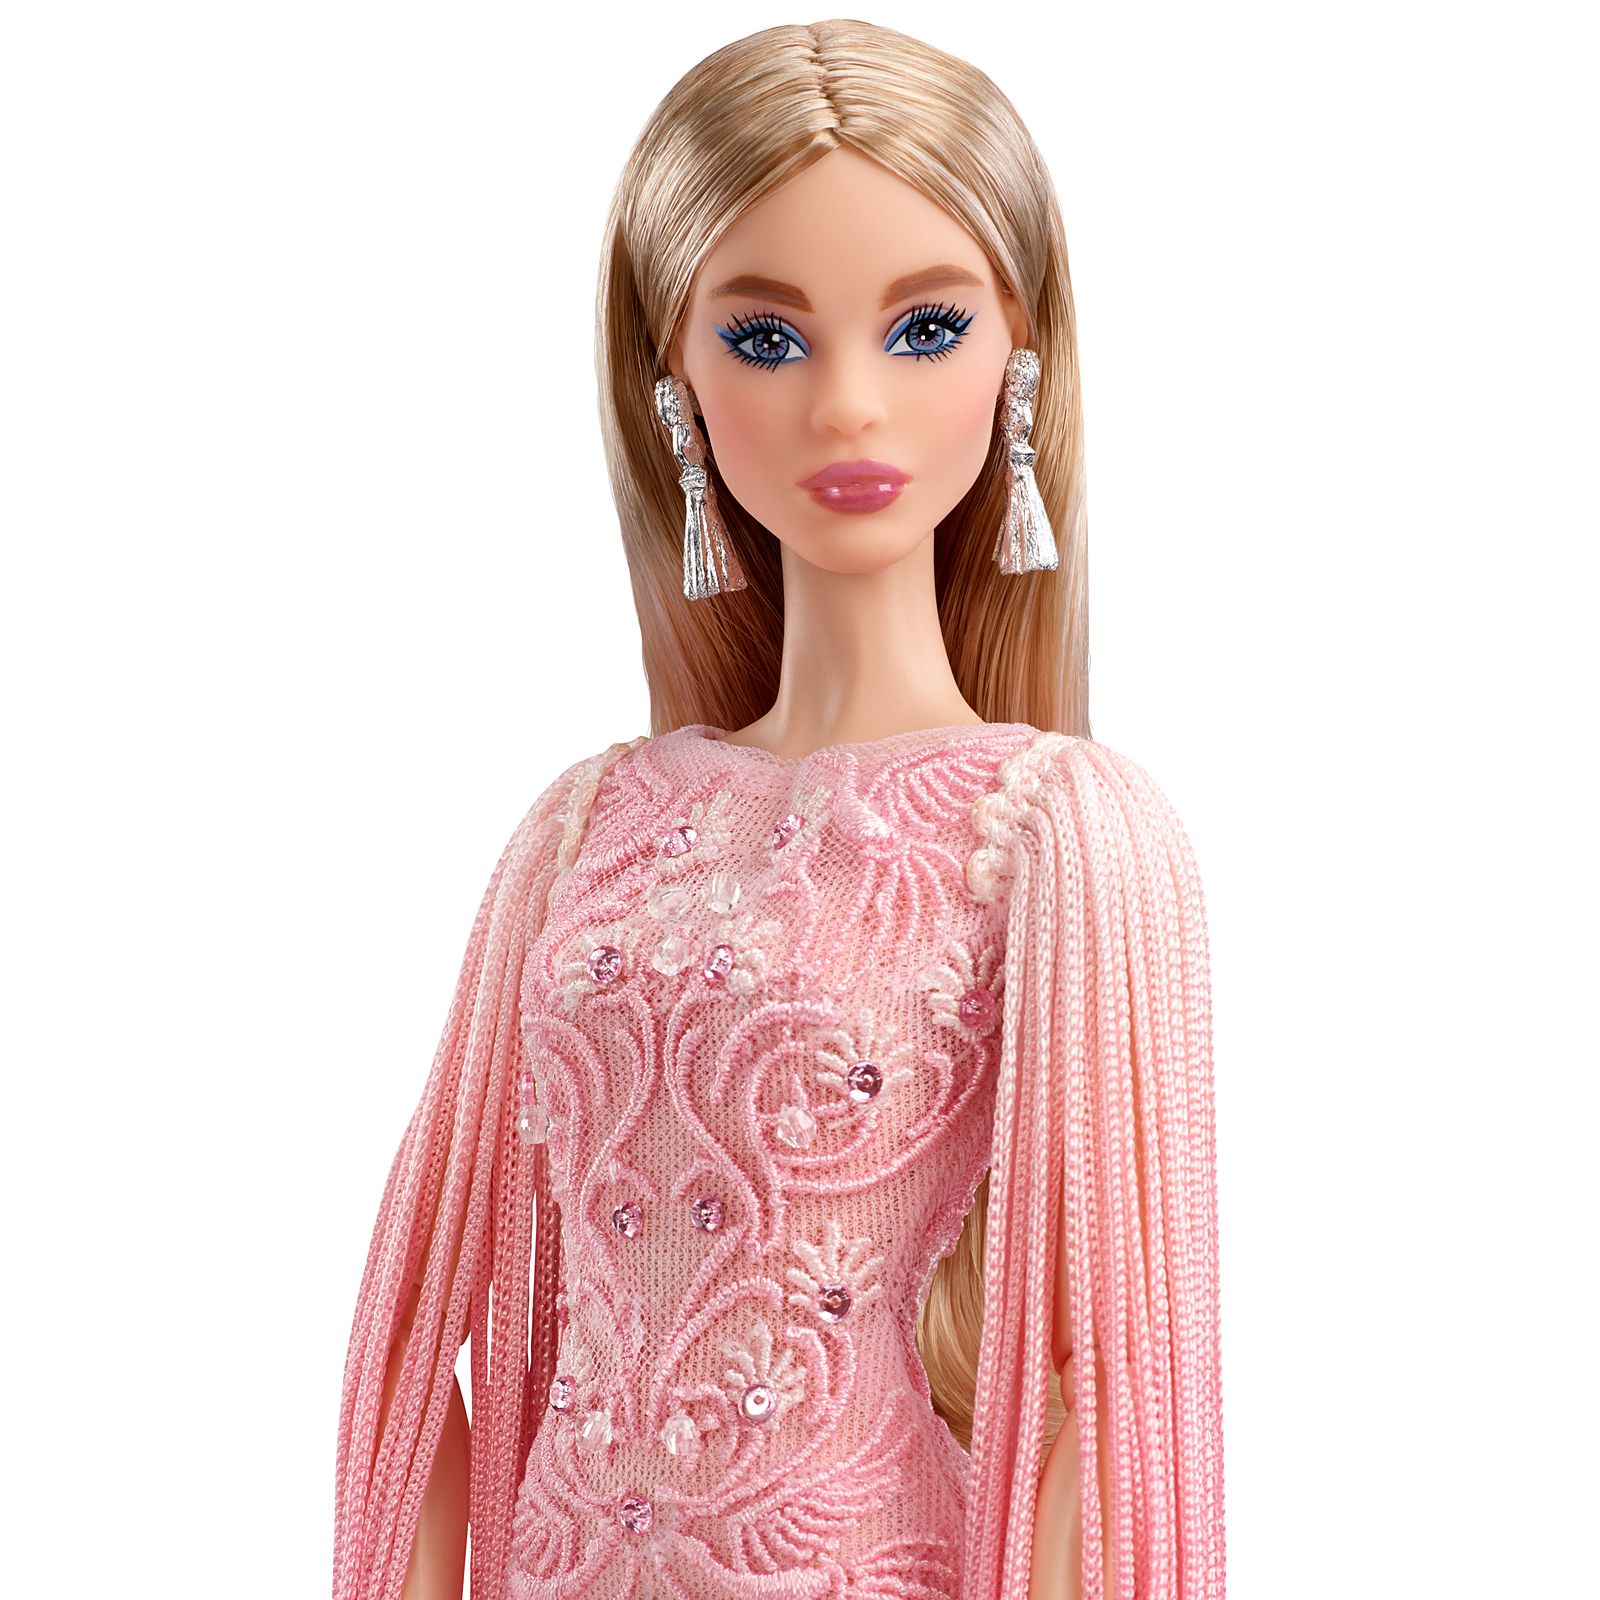 Blush Fringed Gown Barbie Doll - Perfectory Barbie Edition